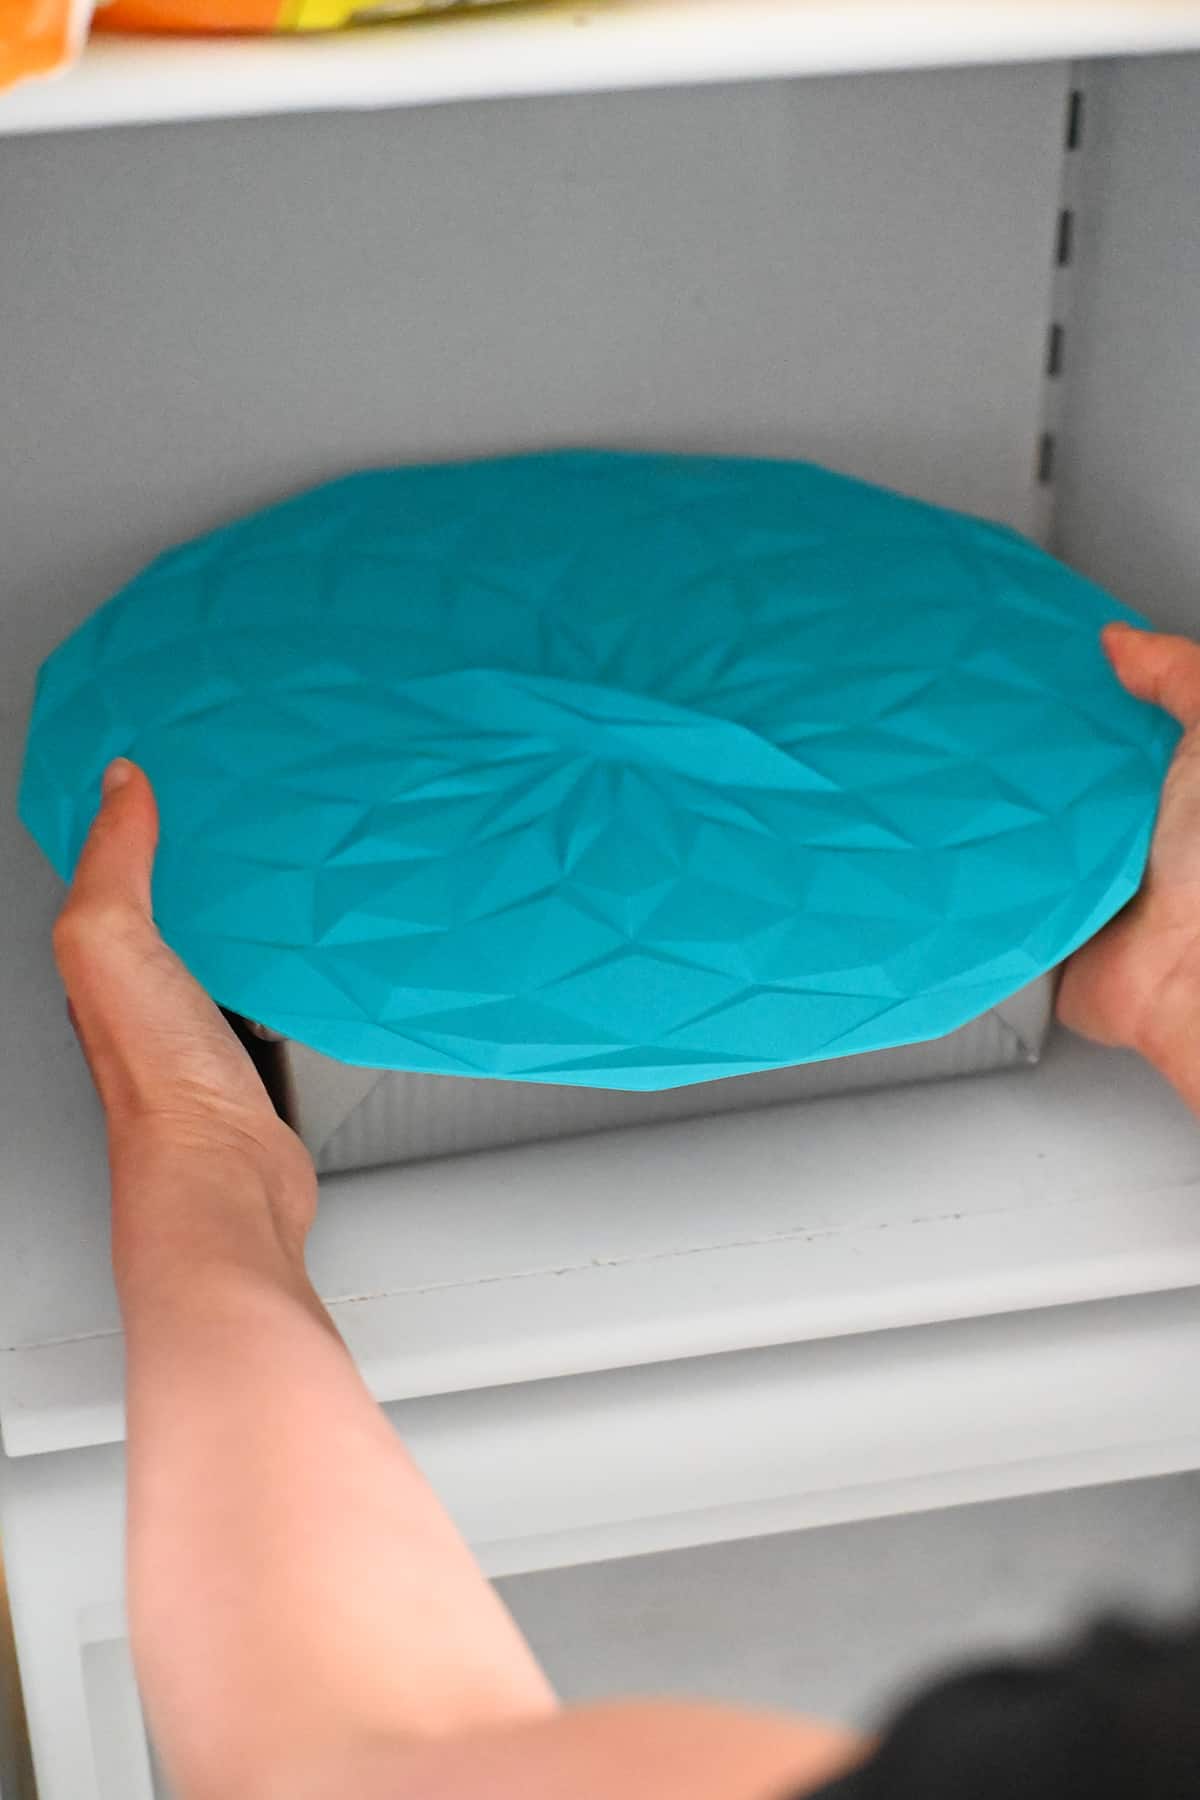 A square baking pan filled with strawberry pretzel salad is covered with a blue silicone lid as it is being placed in a freezer.